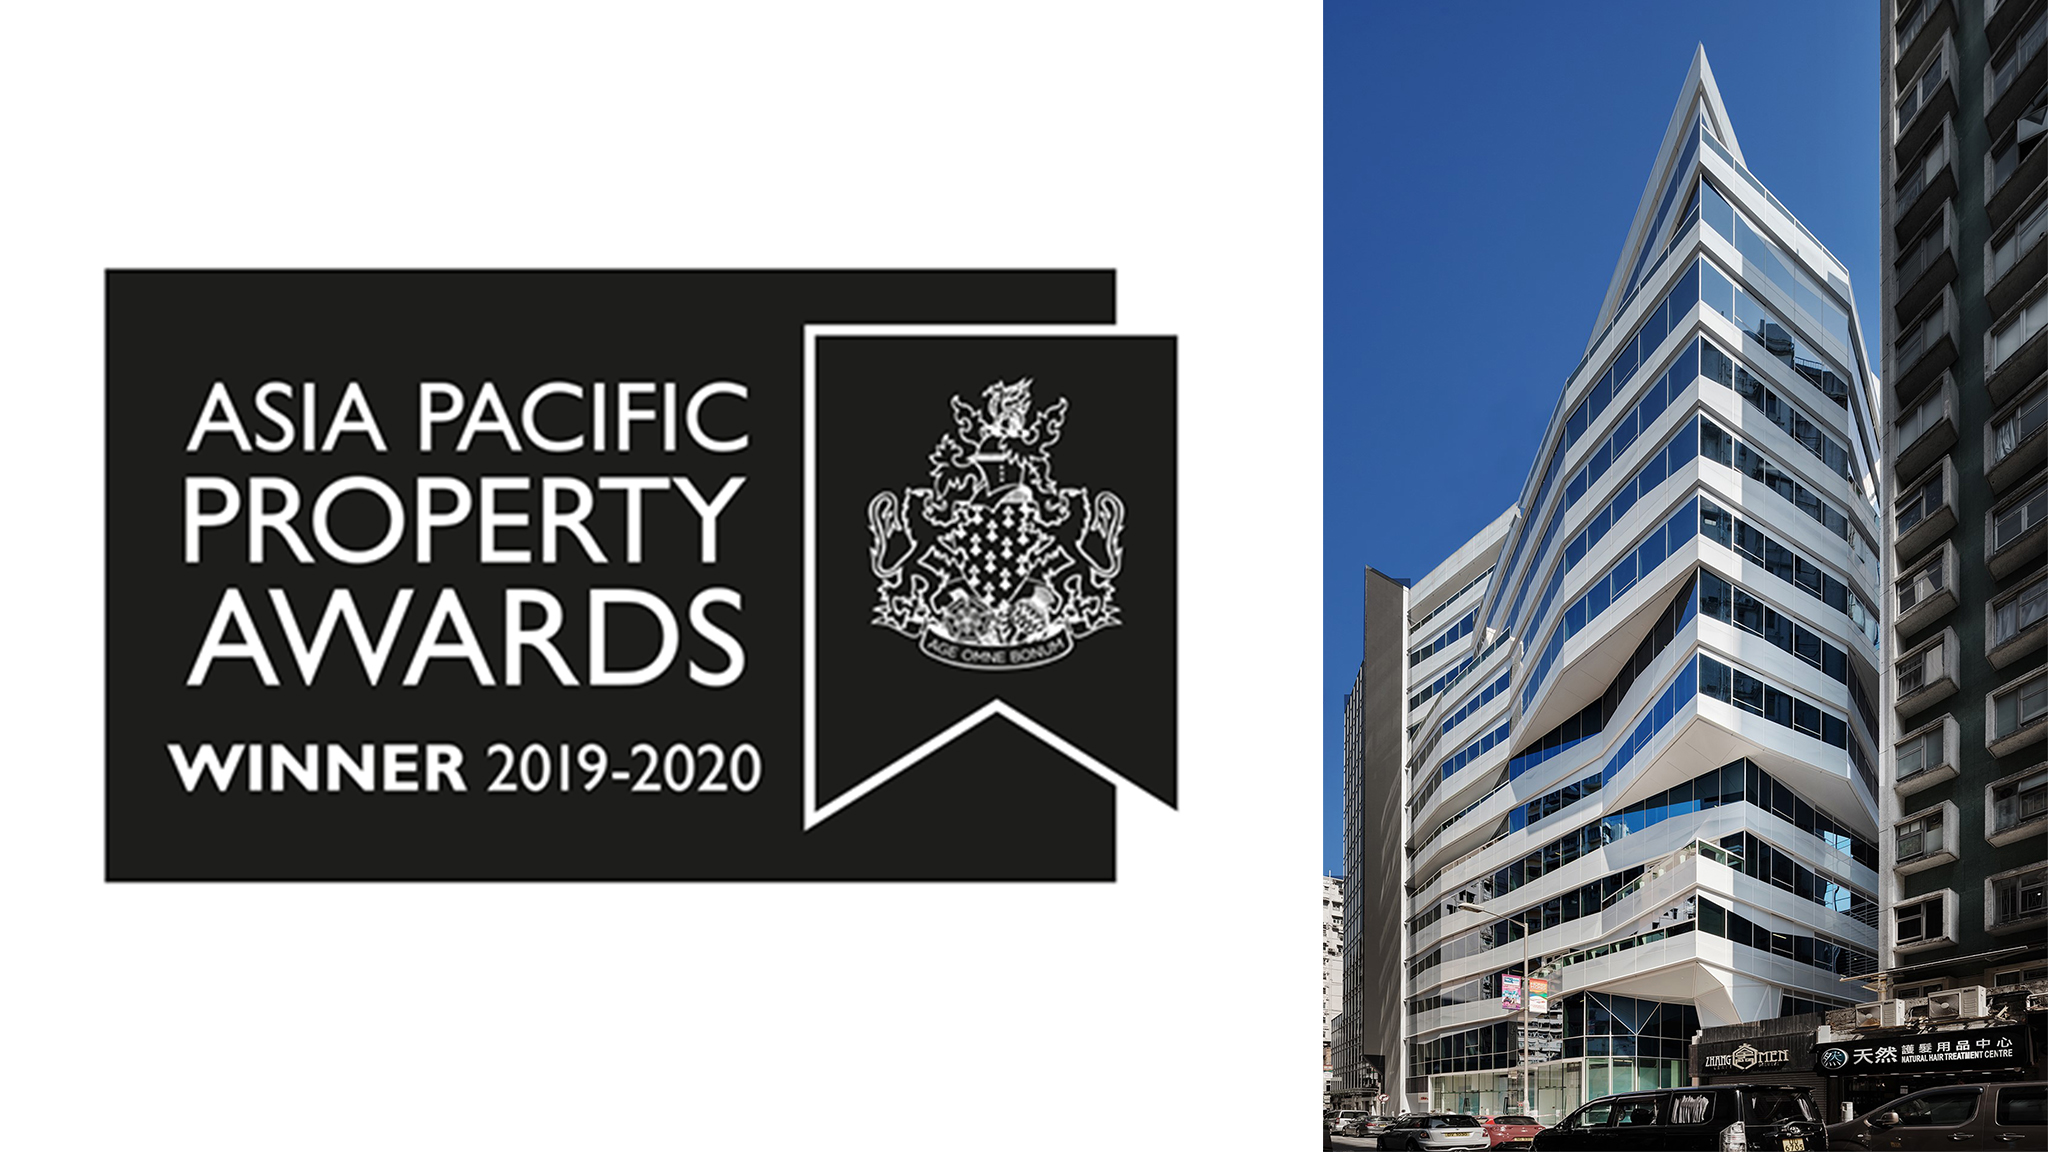 ARK receives Asia Pacific Property Awards 2019